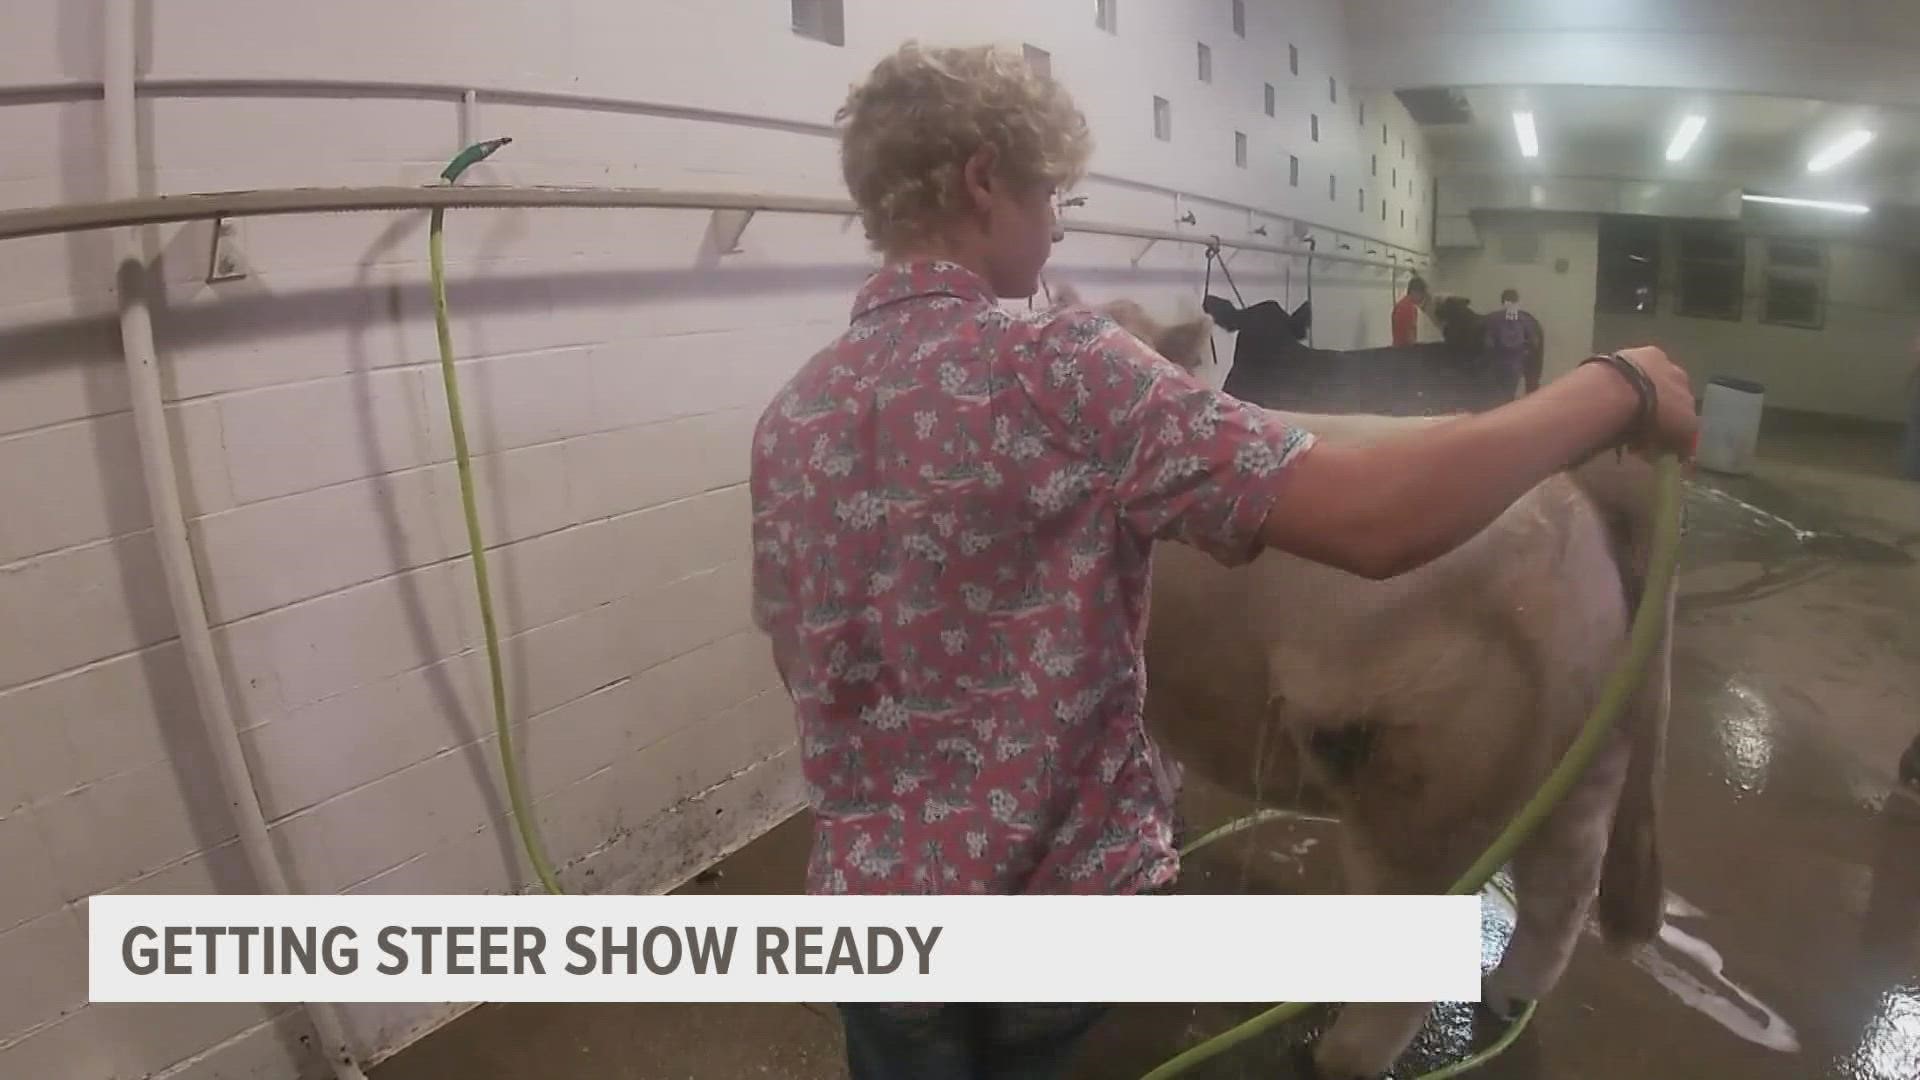 One kid in 4-H woke up before sunrise to get the process started on preparing his steer to get judged in a competition.